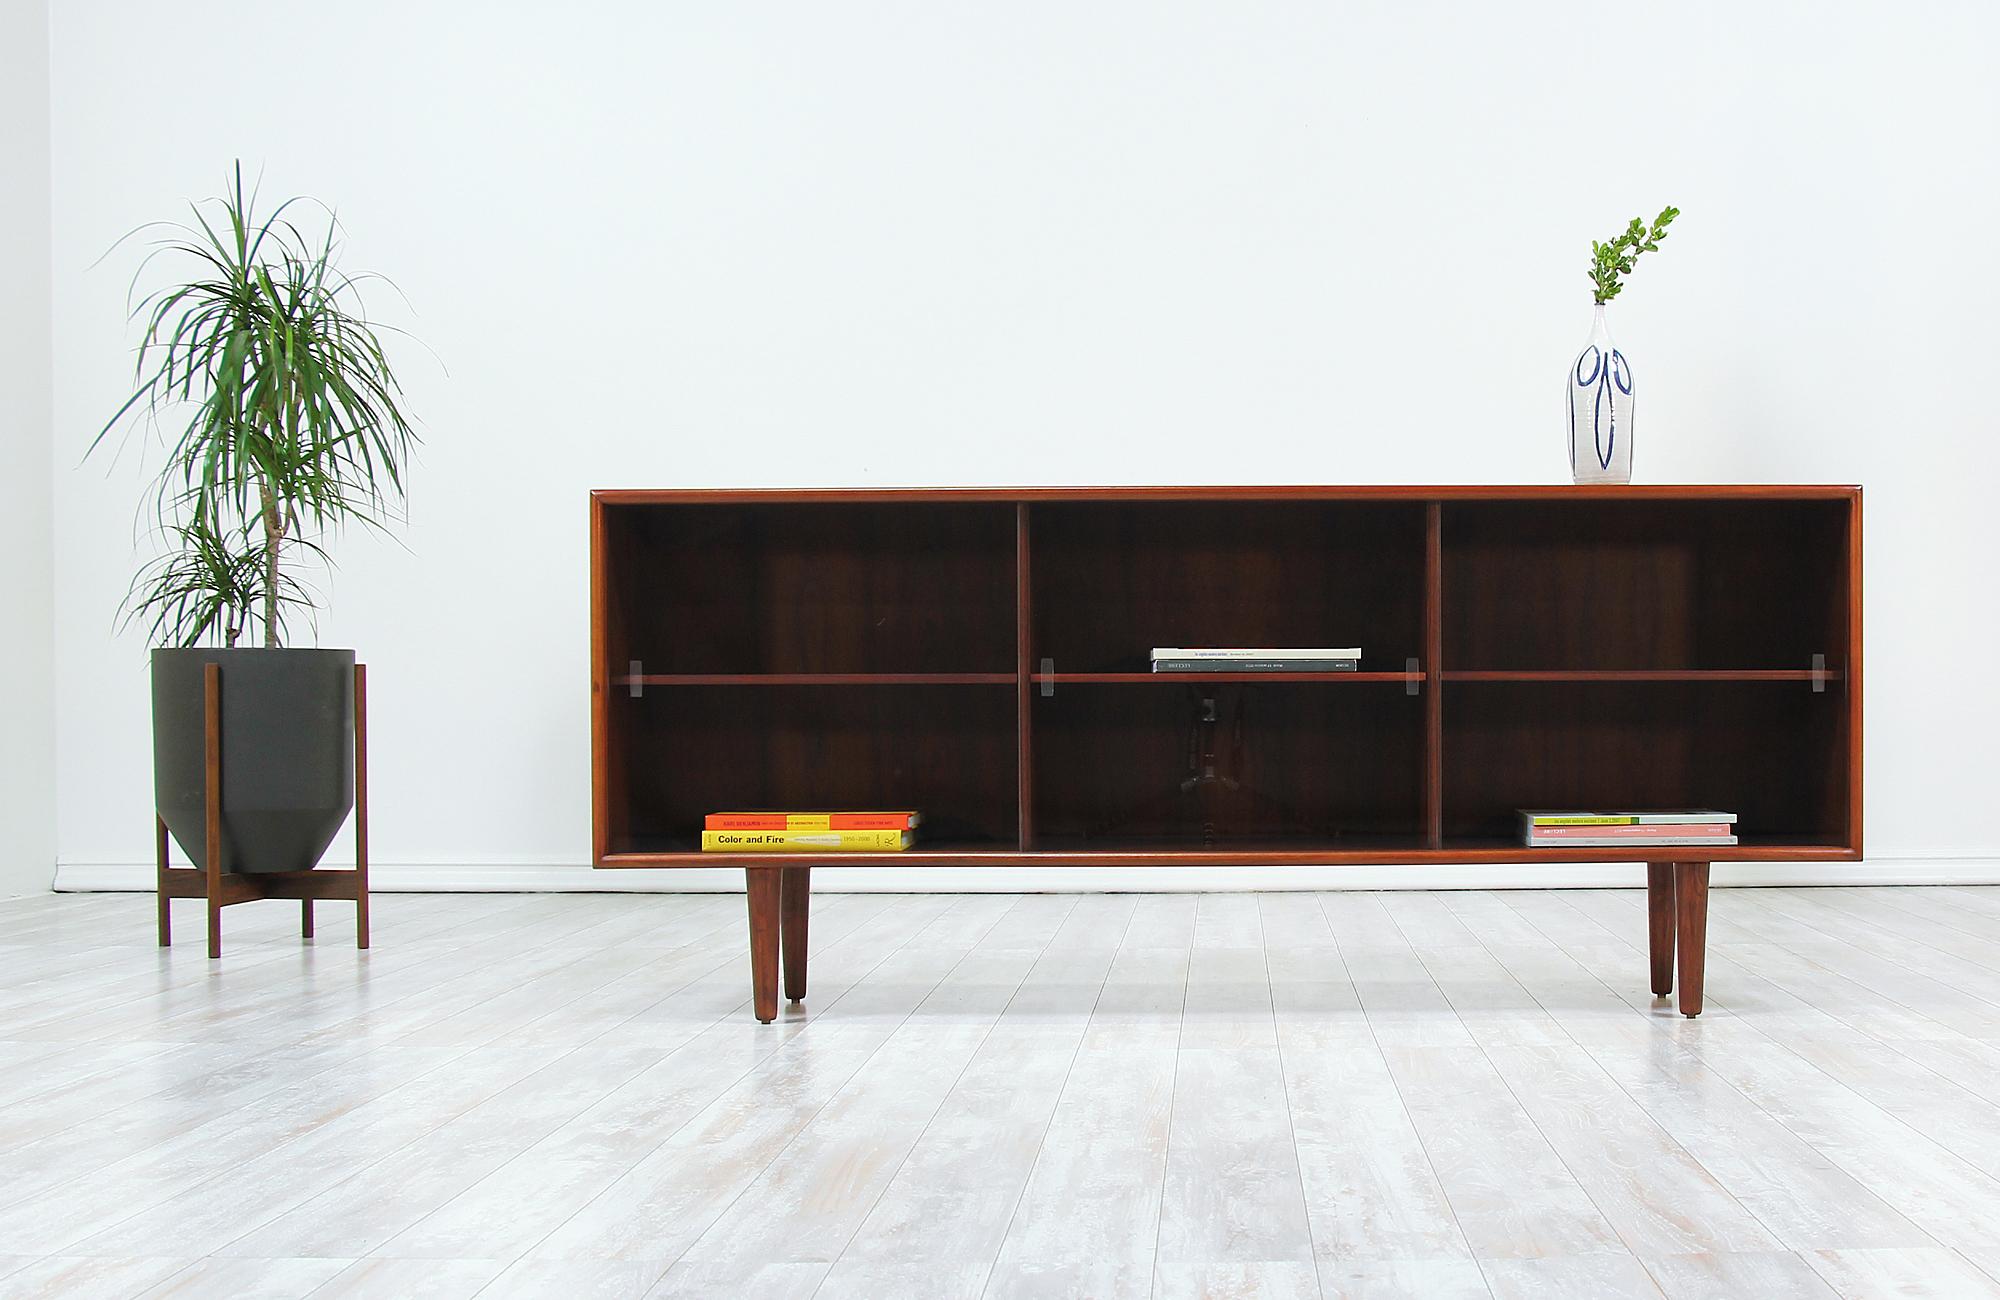 Stylish Danish credenza designed and manufactured by H.P. Hansen Møbelindustri in Denmark, circa 1960s. This sleek design features a rosewood case sitting on four tapered legs with its original sliding glass doors. The interior is comprised of three